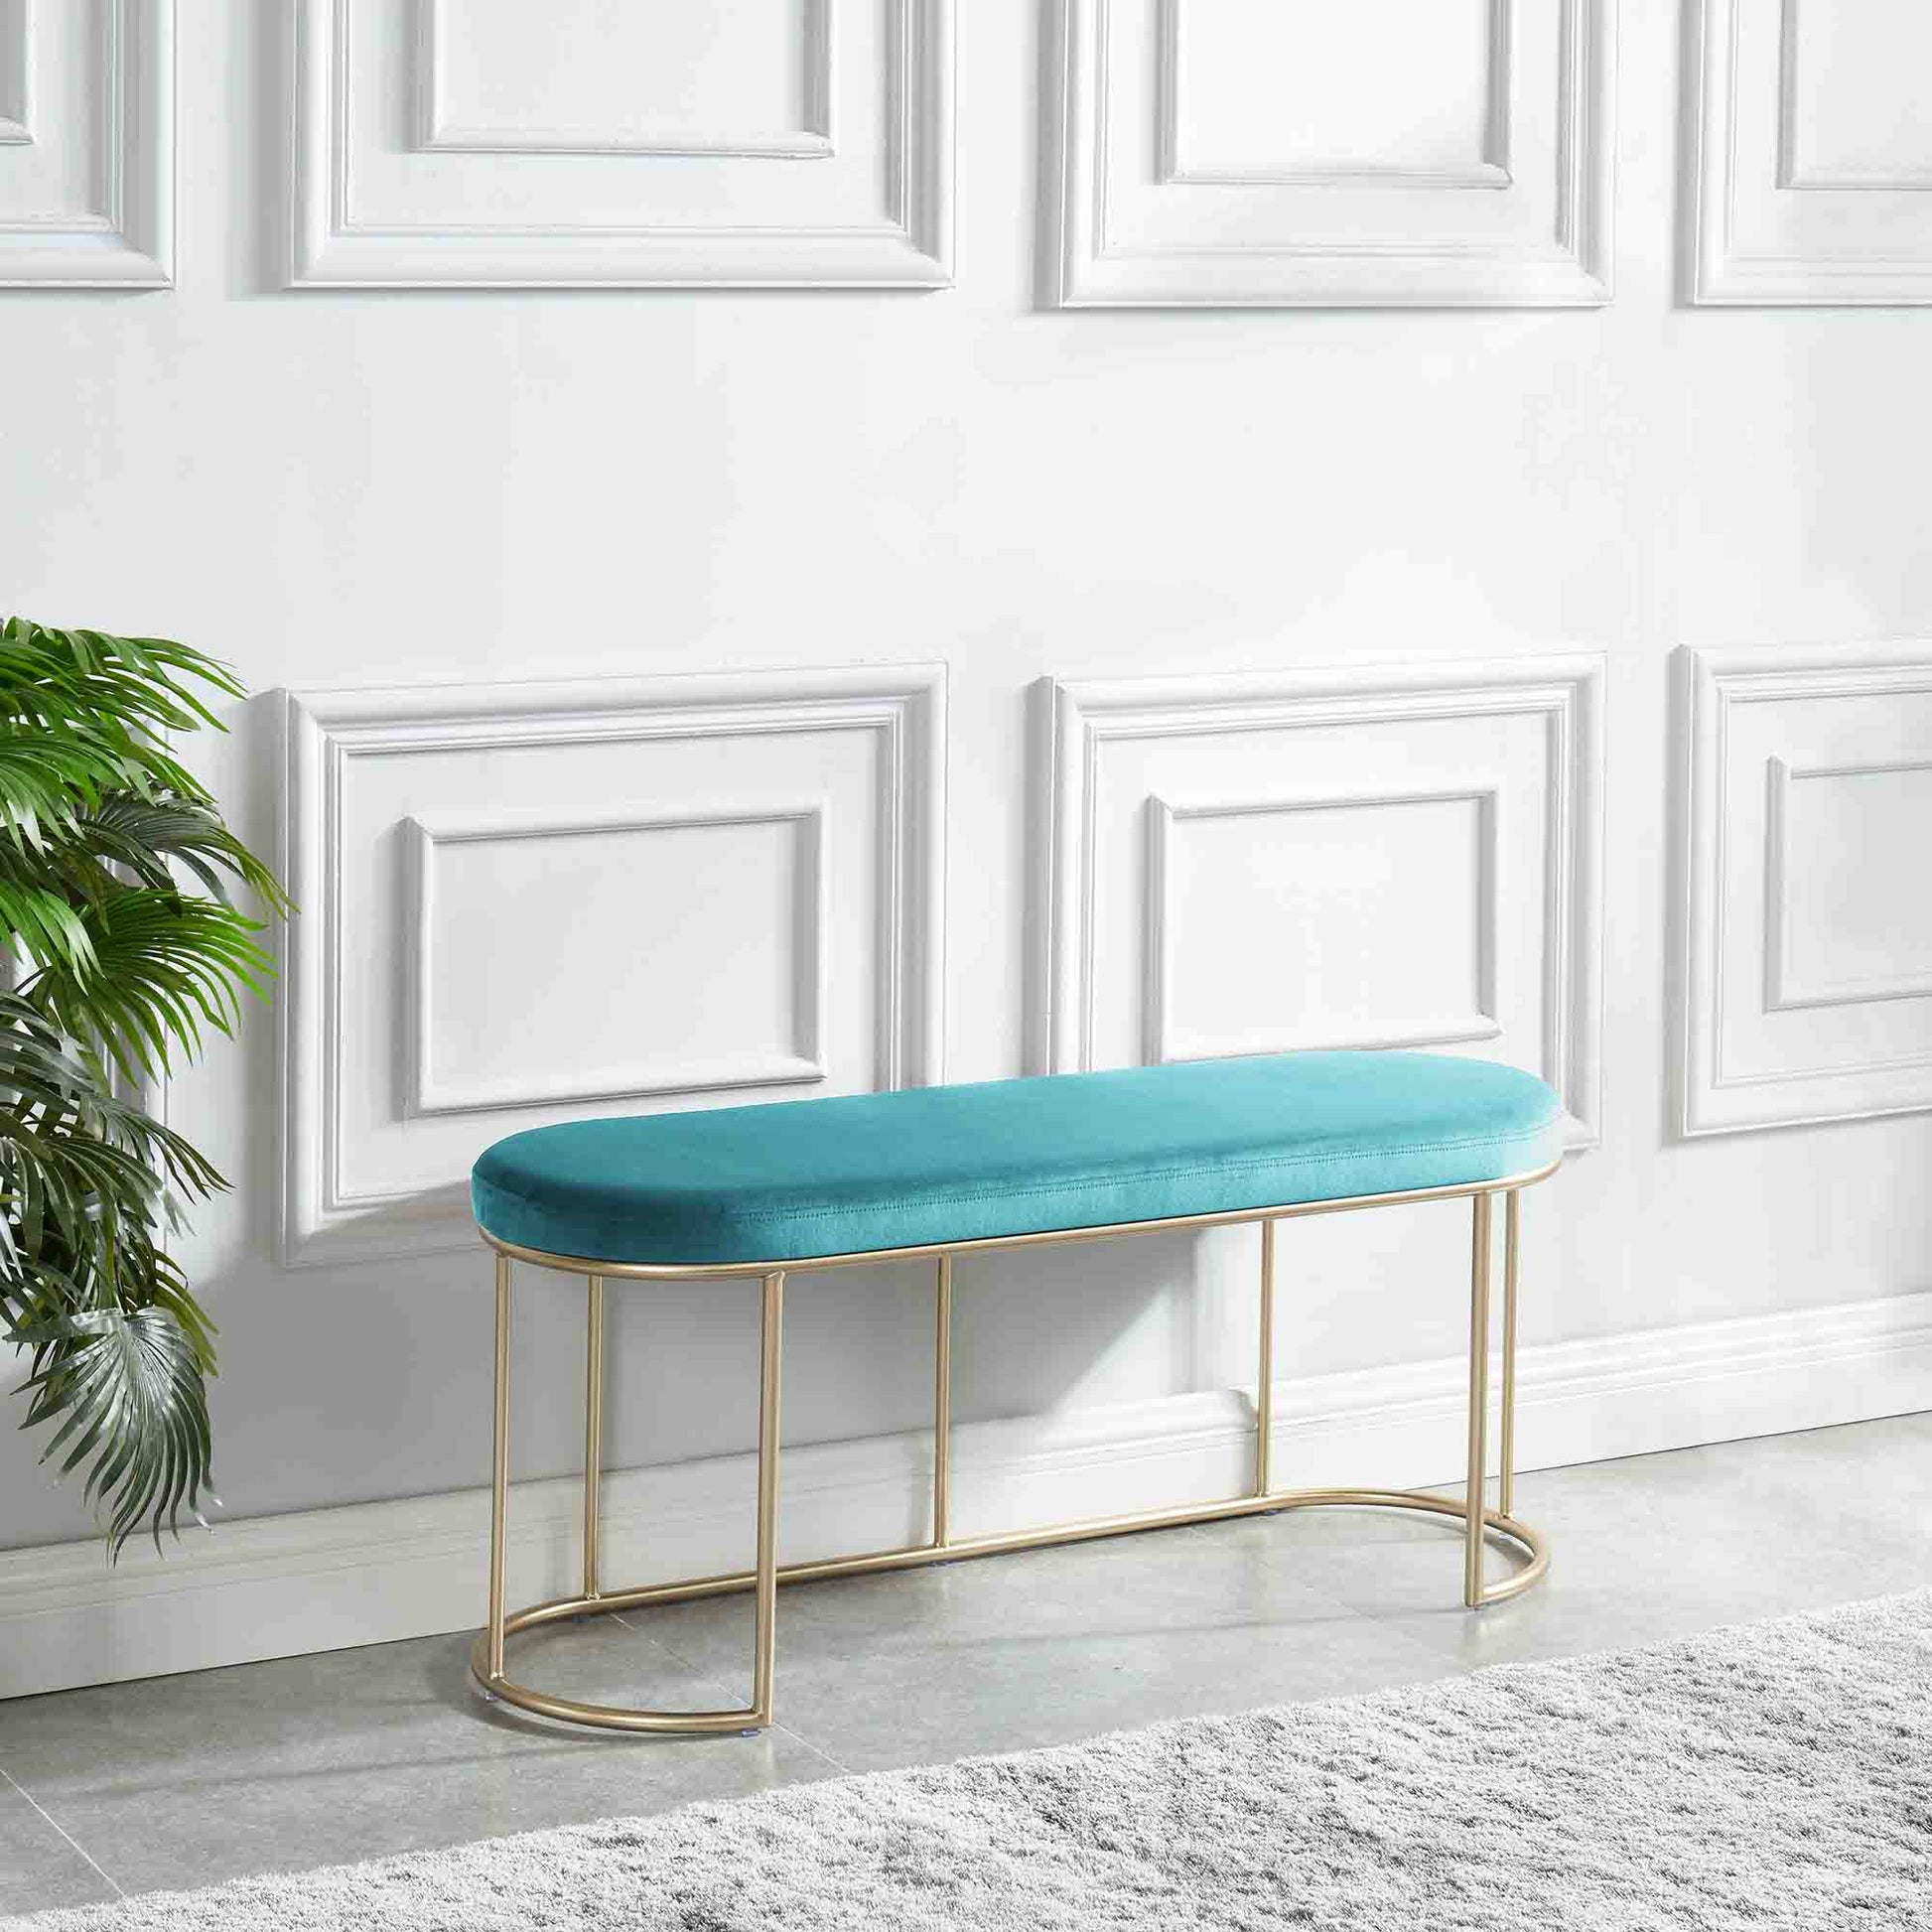 Perla Bench in Teal/Gold - Dreamart Gallery